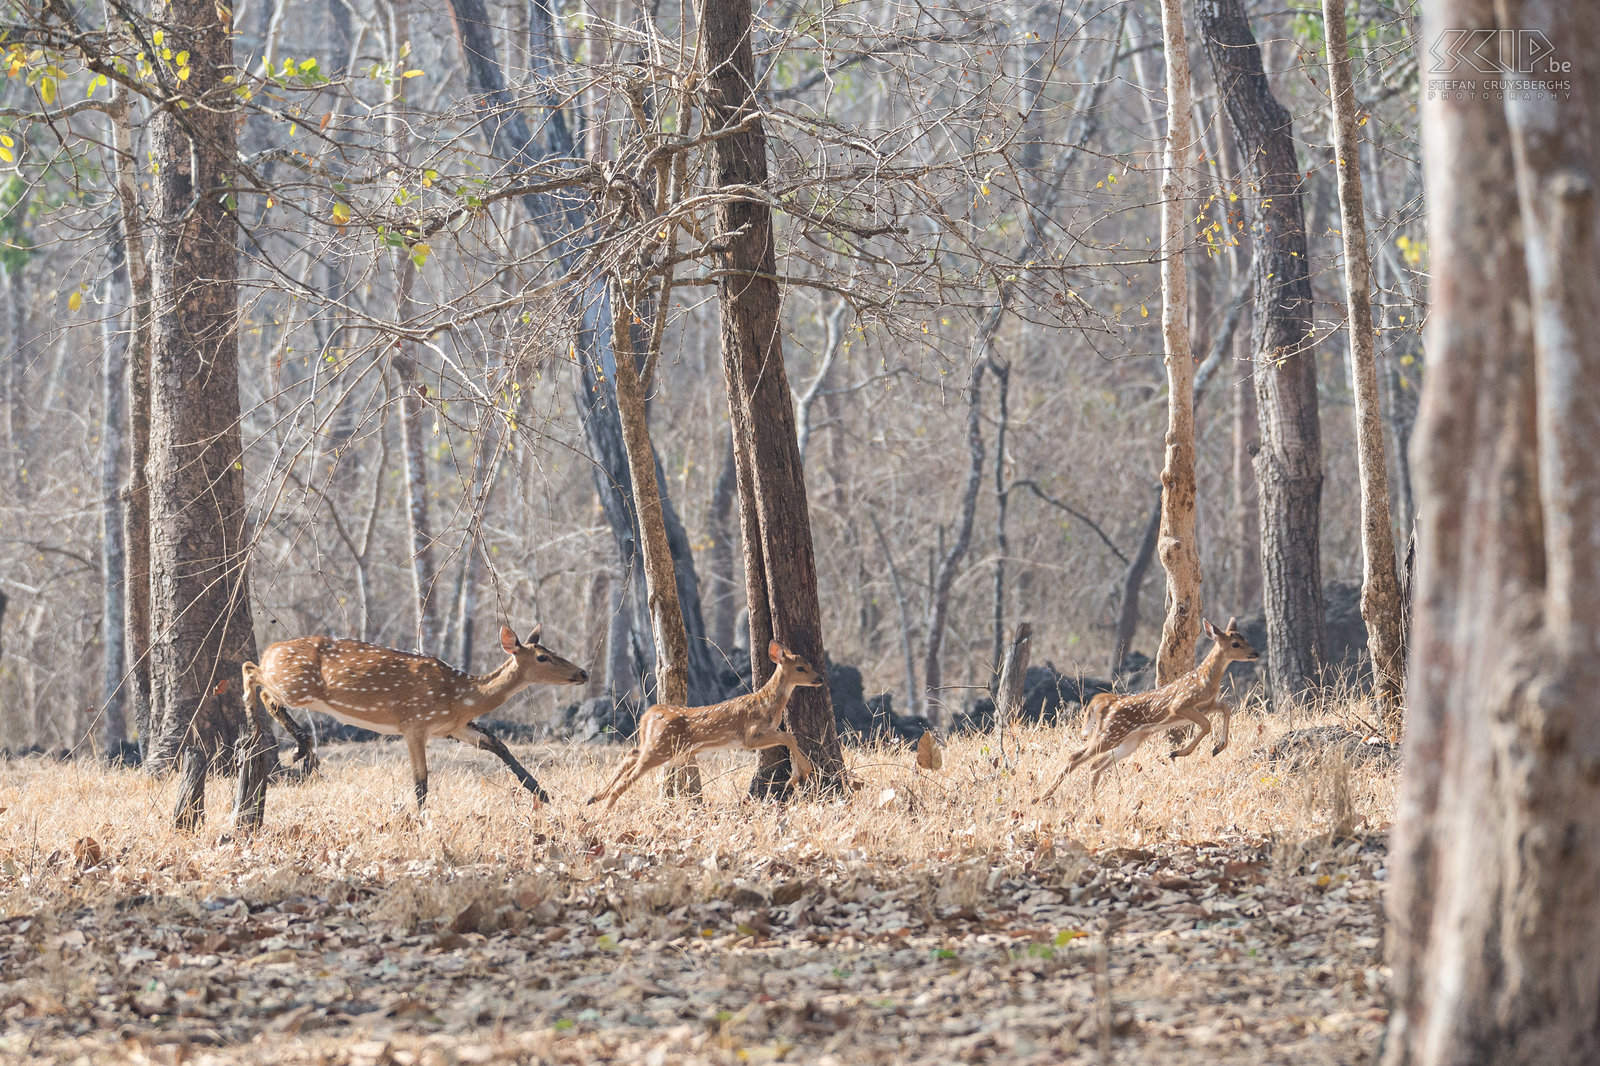 Kabini - Spotted deers The spotted deer (Axis deer, Chital, Axis axis) forms matriarchal herds with one adult female and her offspring and many other individuals, male and female.   Stefan Cruysberghs